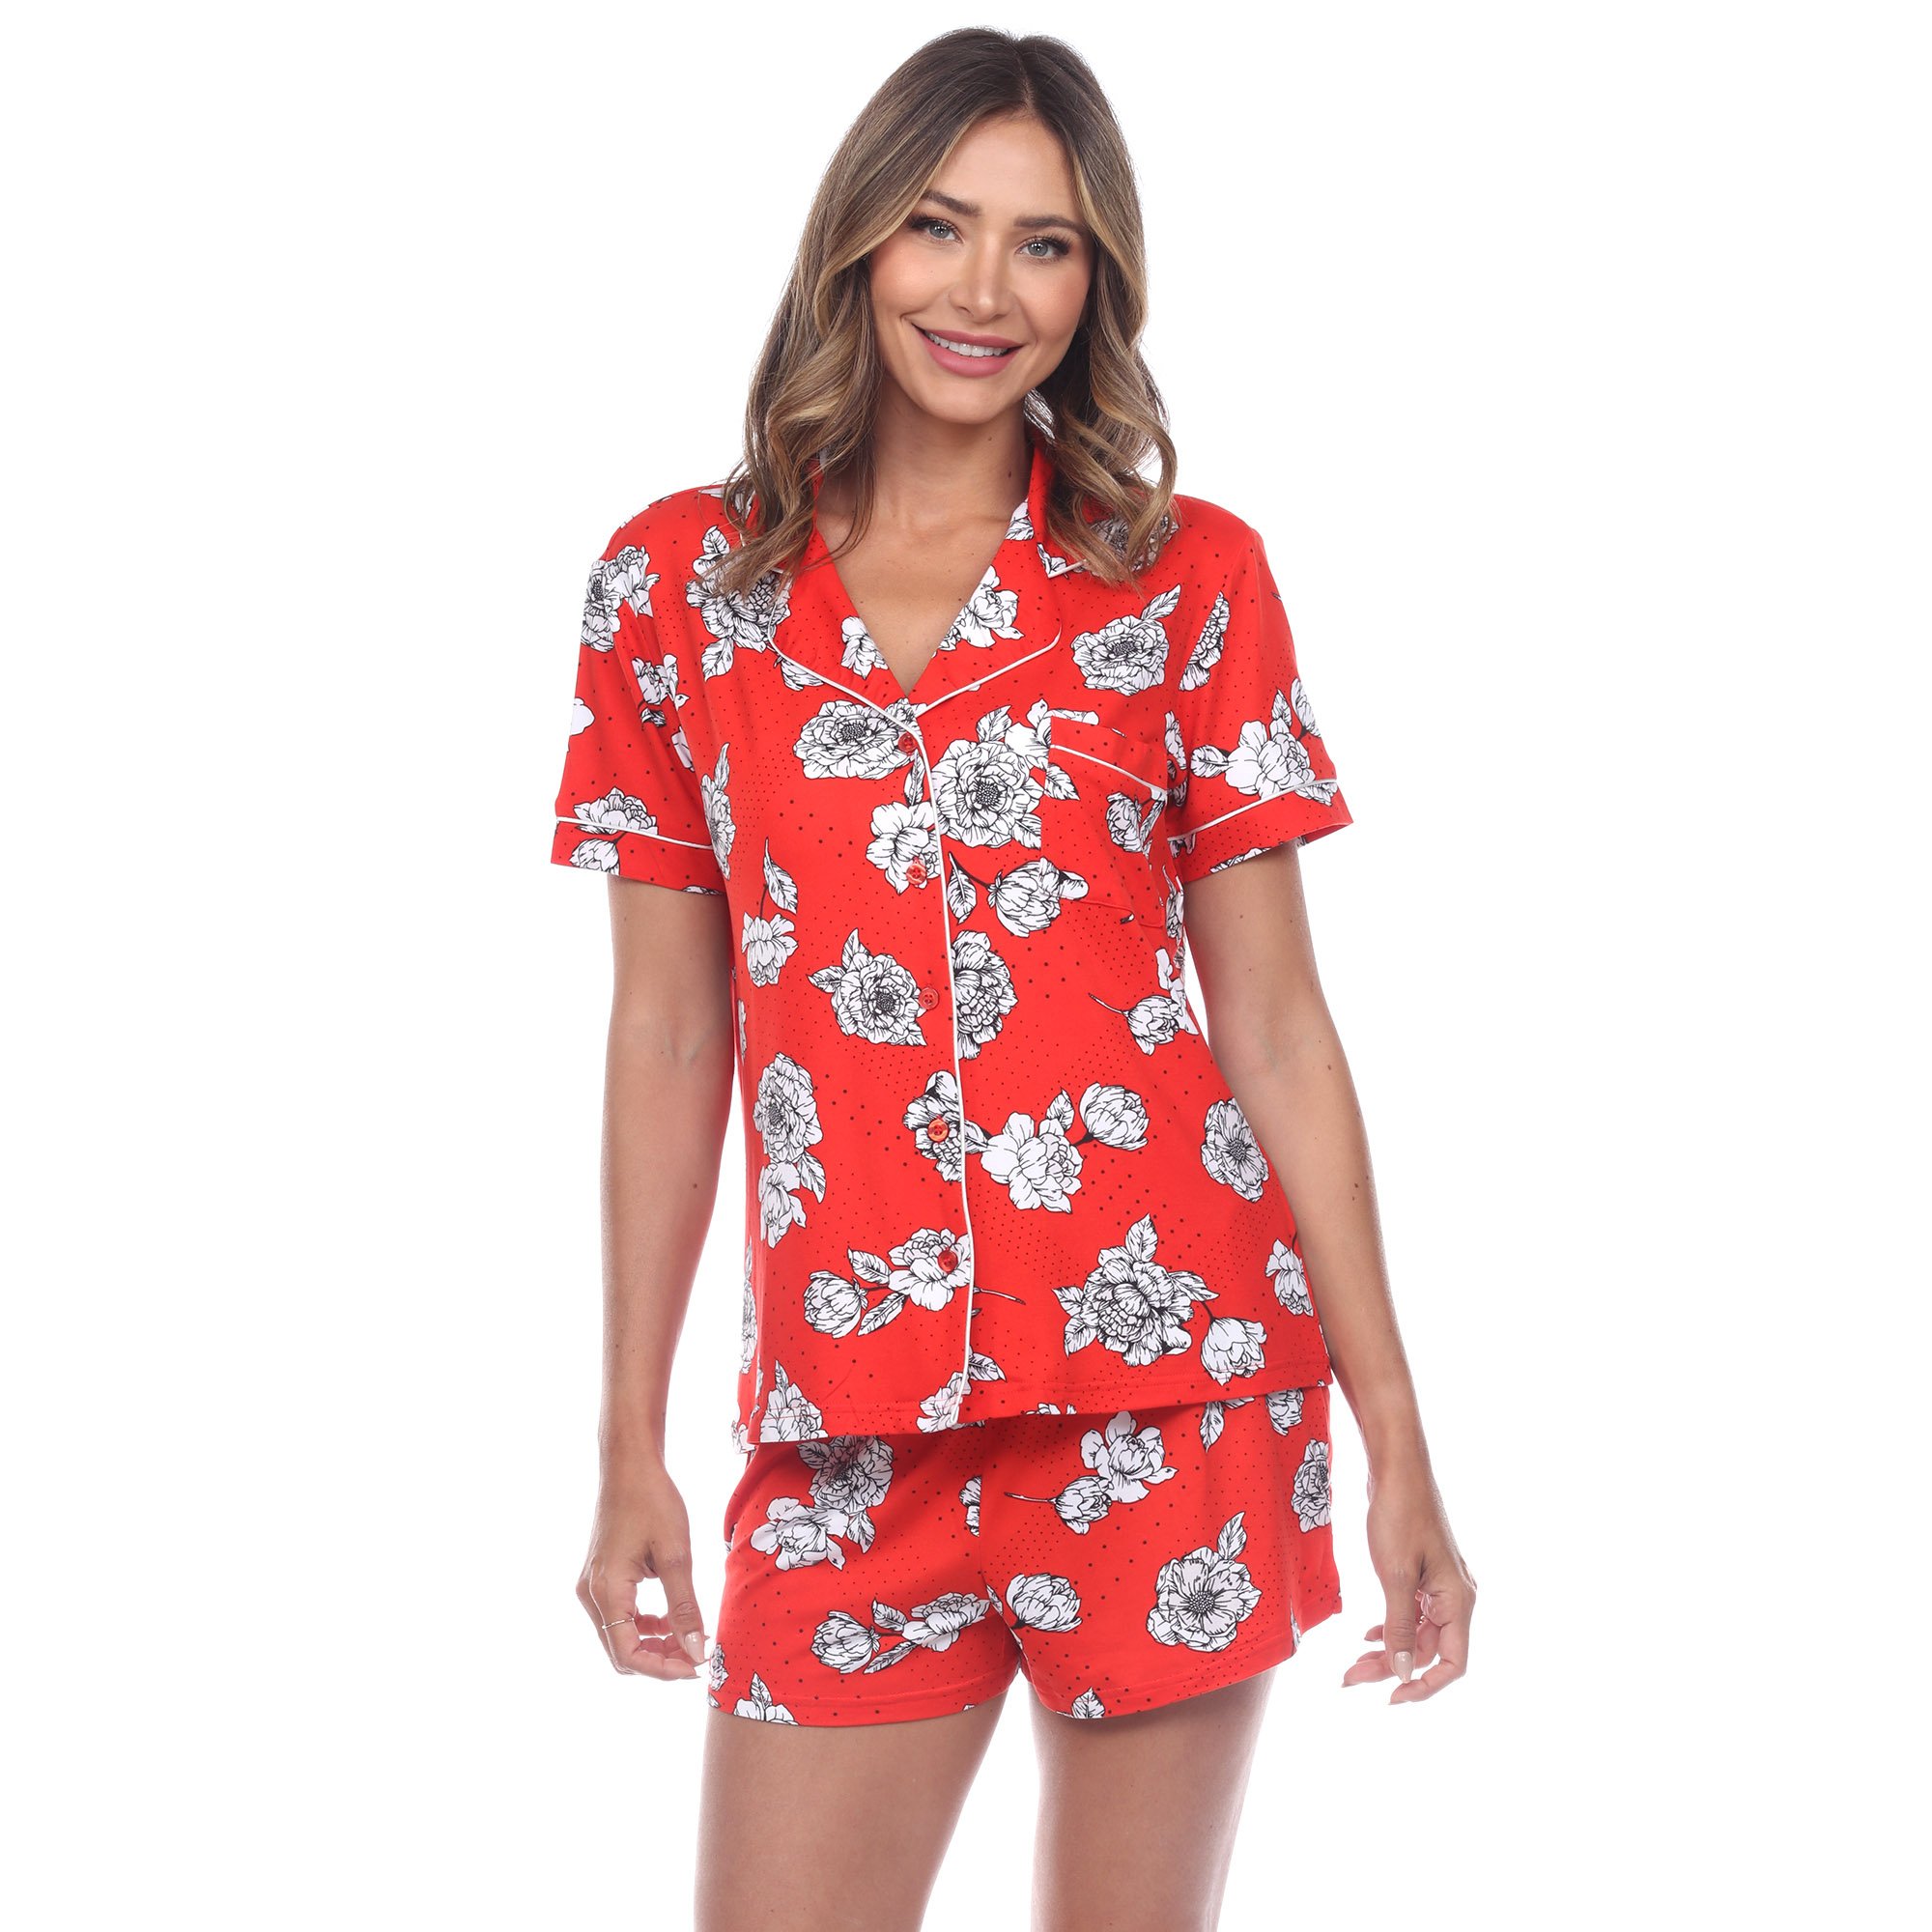 White Mark Women's Short Sleeve Floral Pajama Set - Red, Small